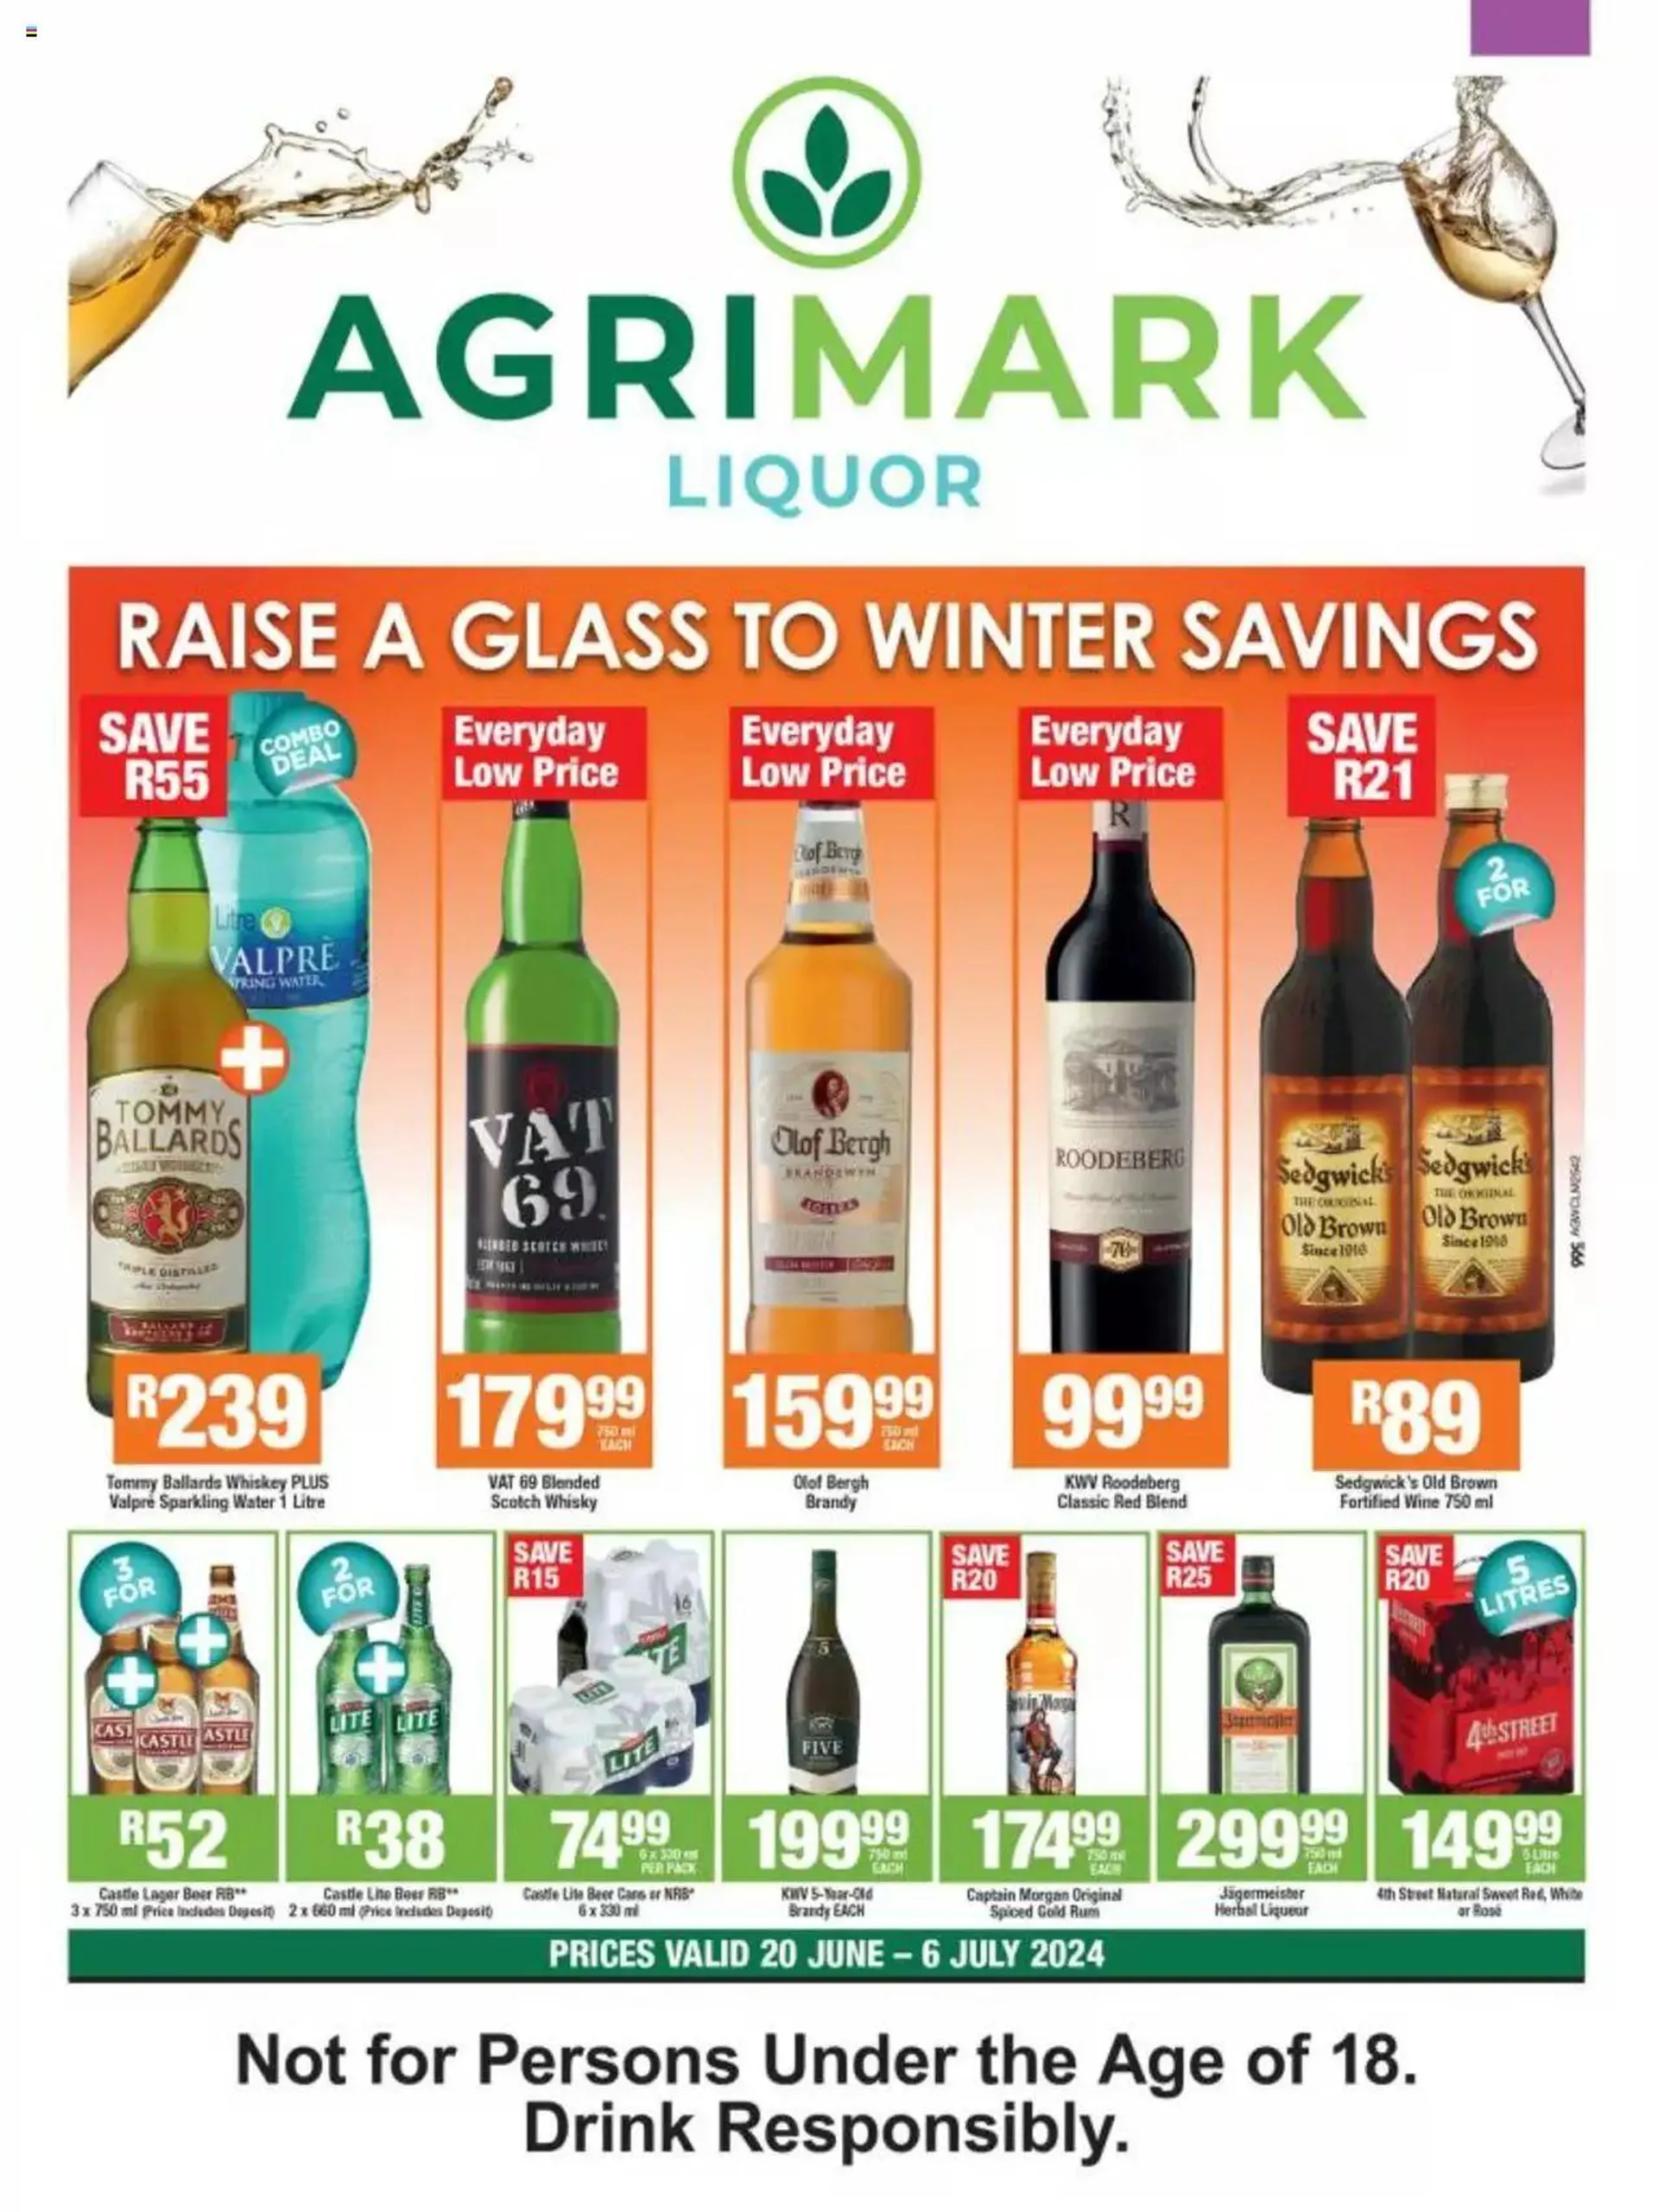 Agrimark - Raise A Glass To Winter Savings - 0